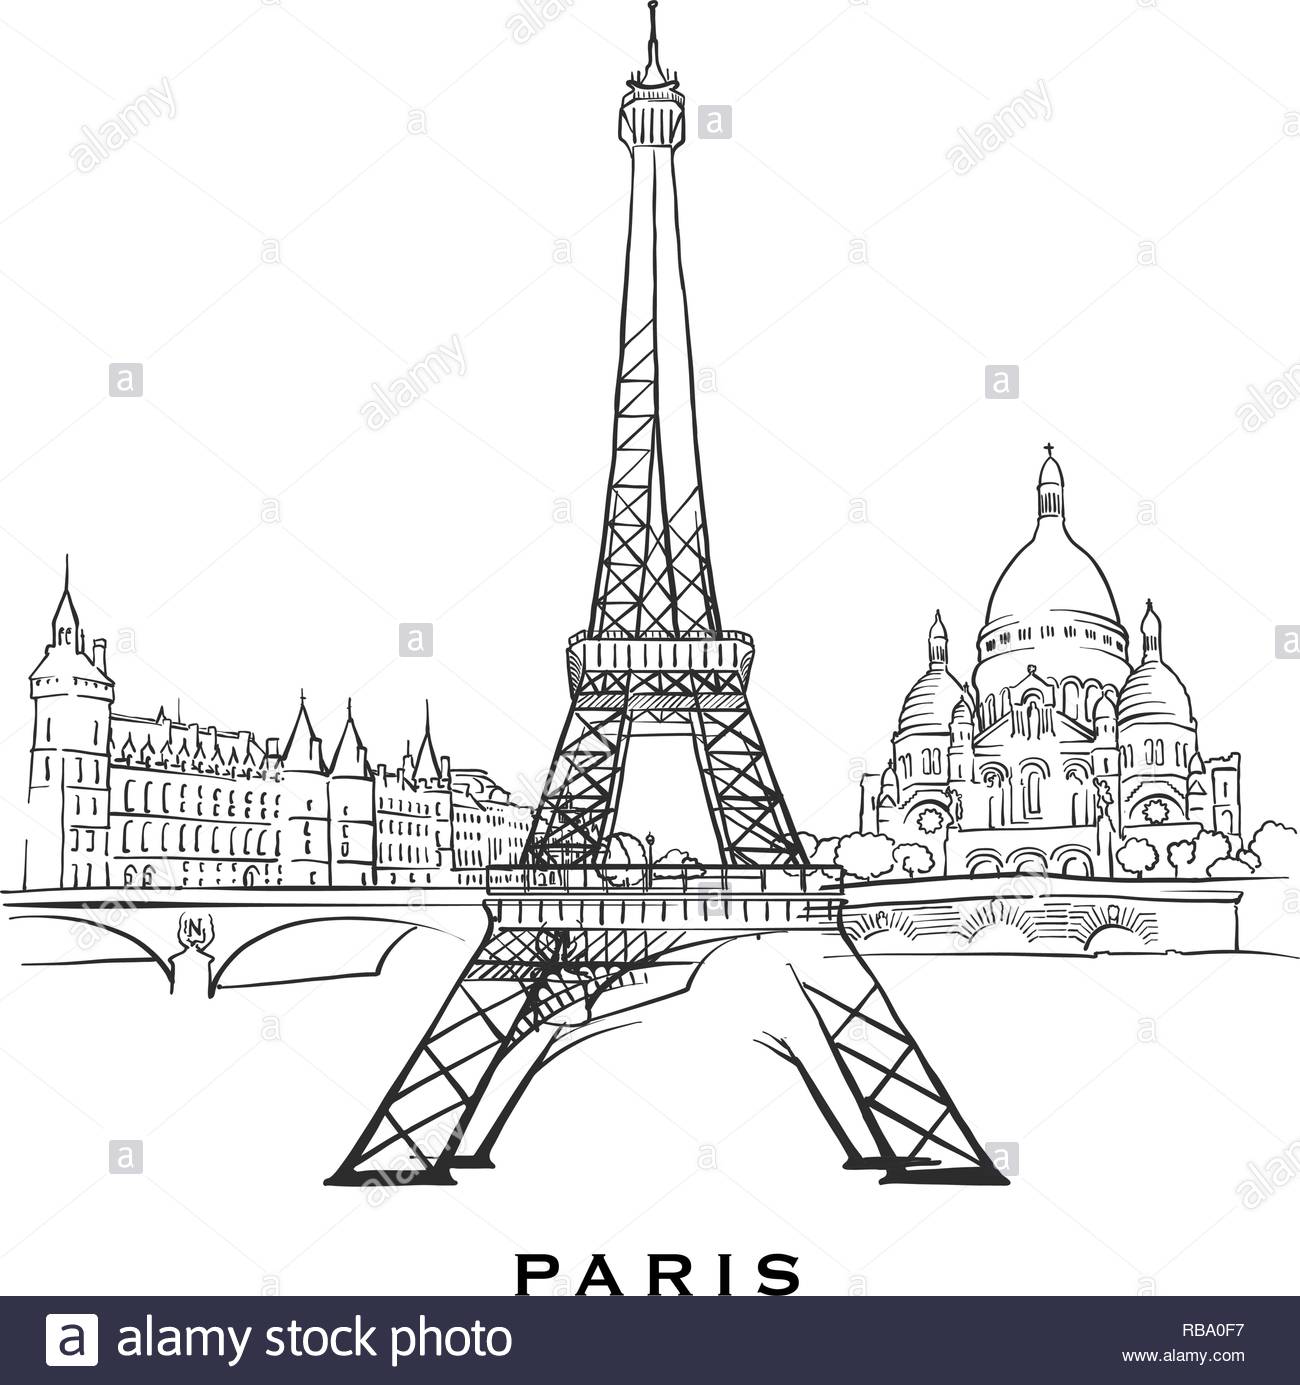 Architecture Sketch Draw of Paris, France Stock Illustration - Illustration  of font, white: 231006563